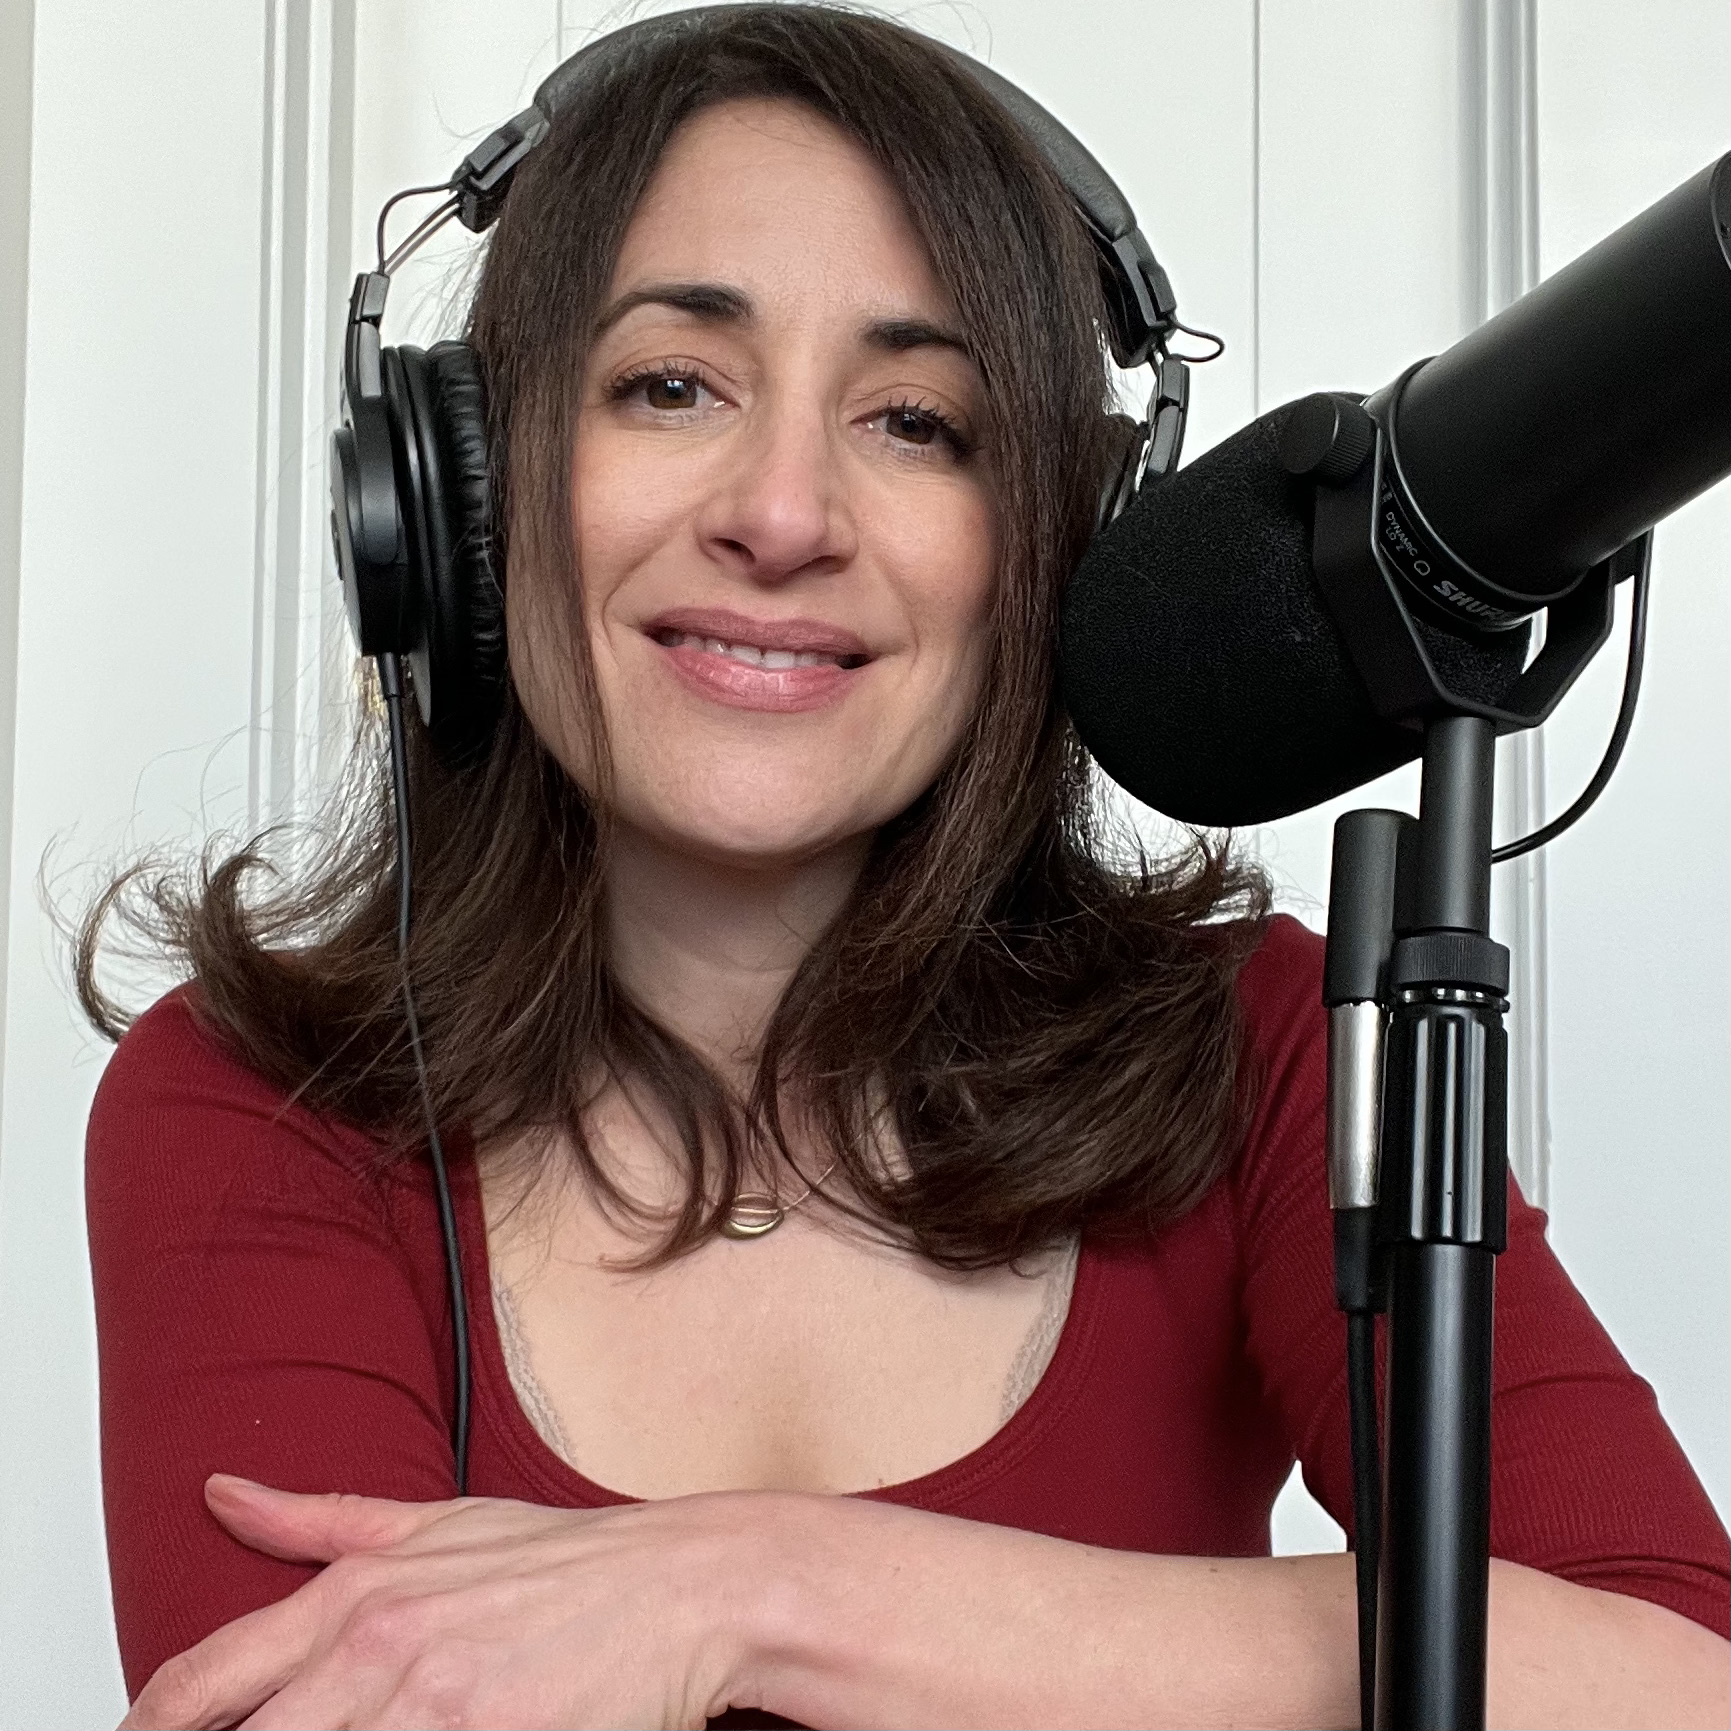 More Beautiful Podcast host Maryann LoRusso